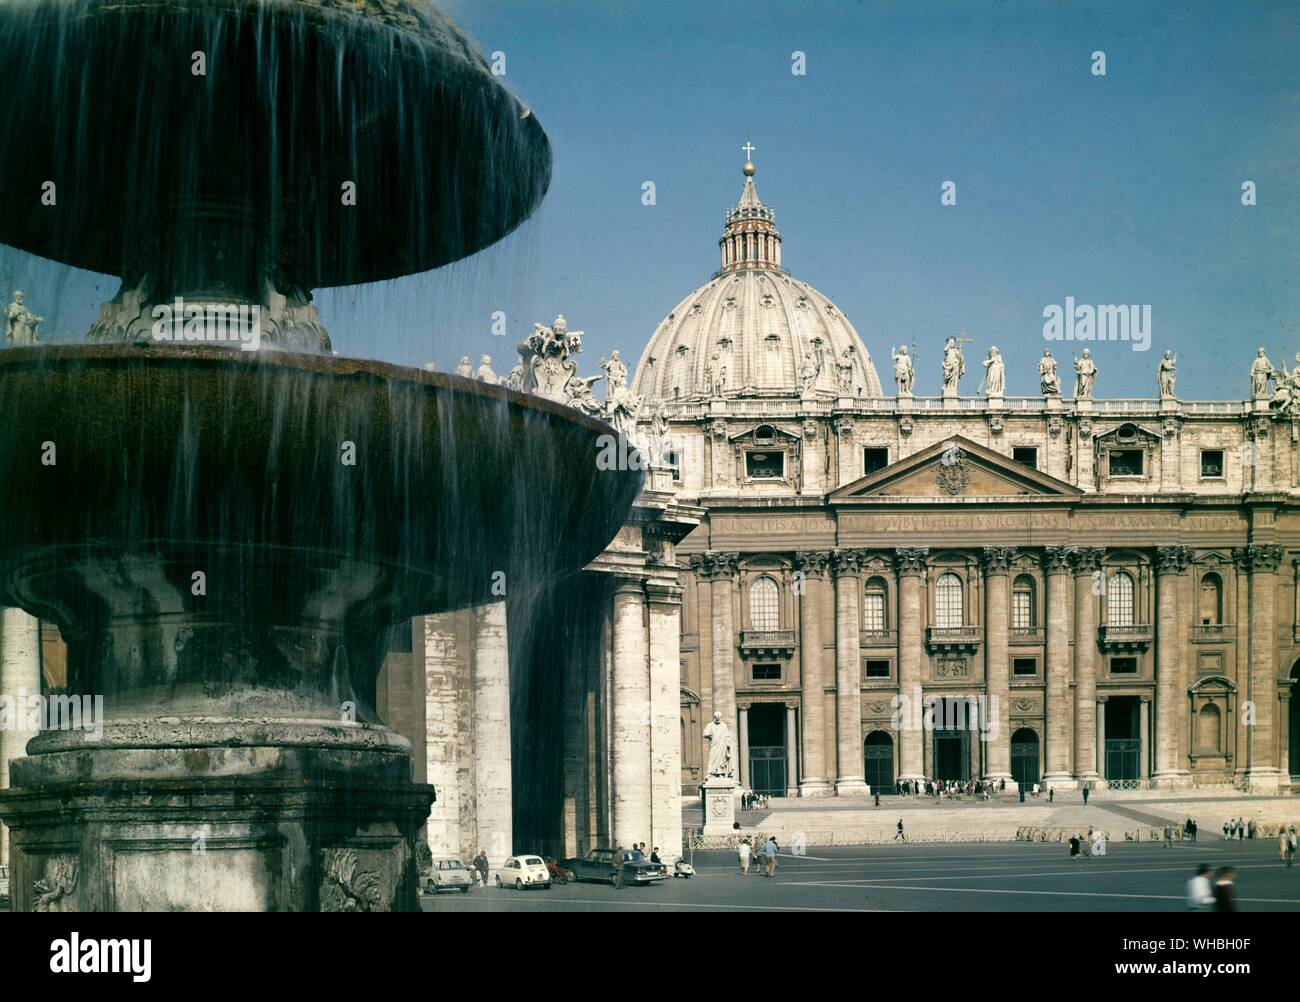 The South Fountain and facade at St. Peter's in Rome. Stock Photo